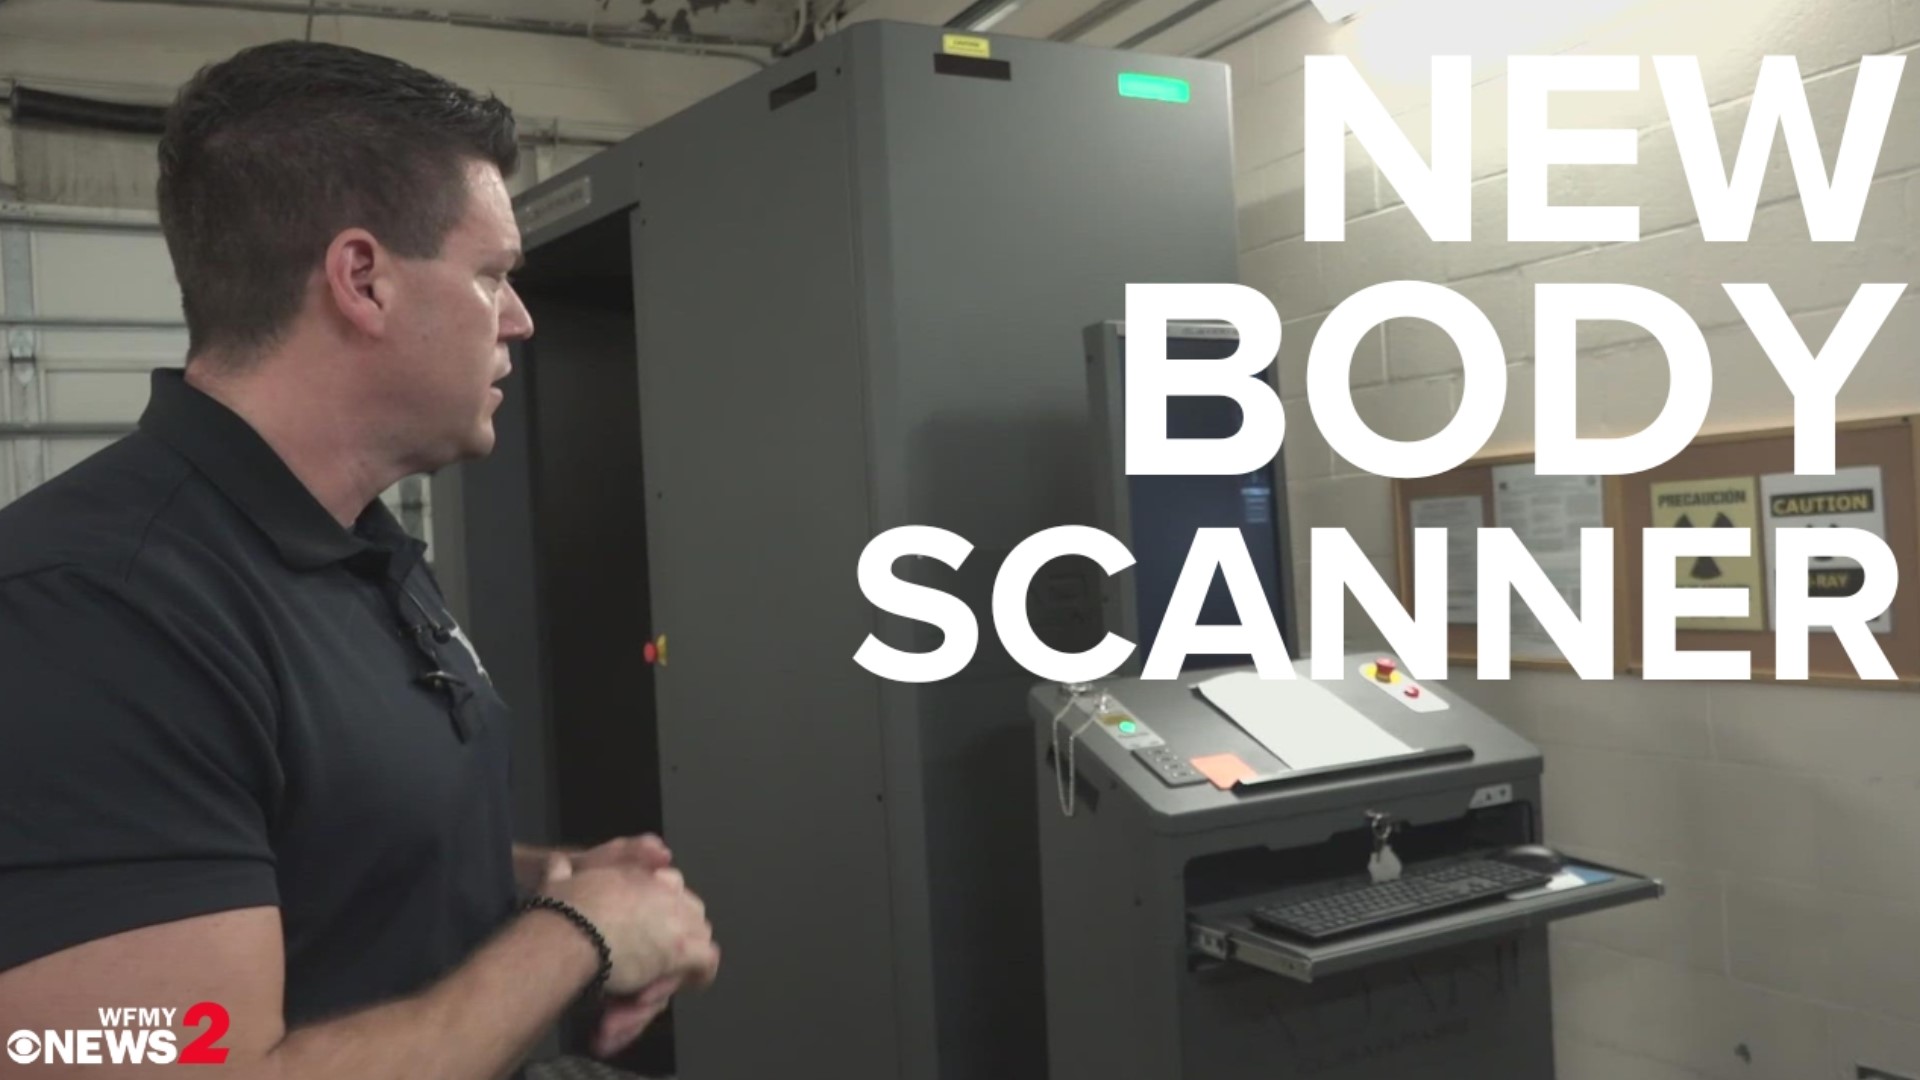 The sheriff's office said the new scanner will help keep contraband out of the jails.